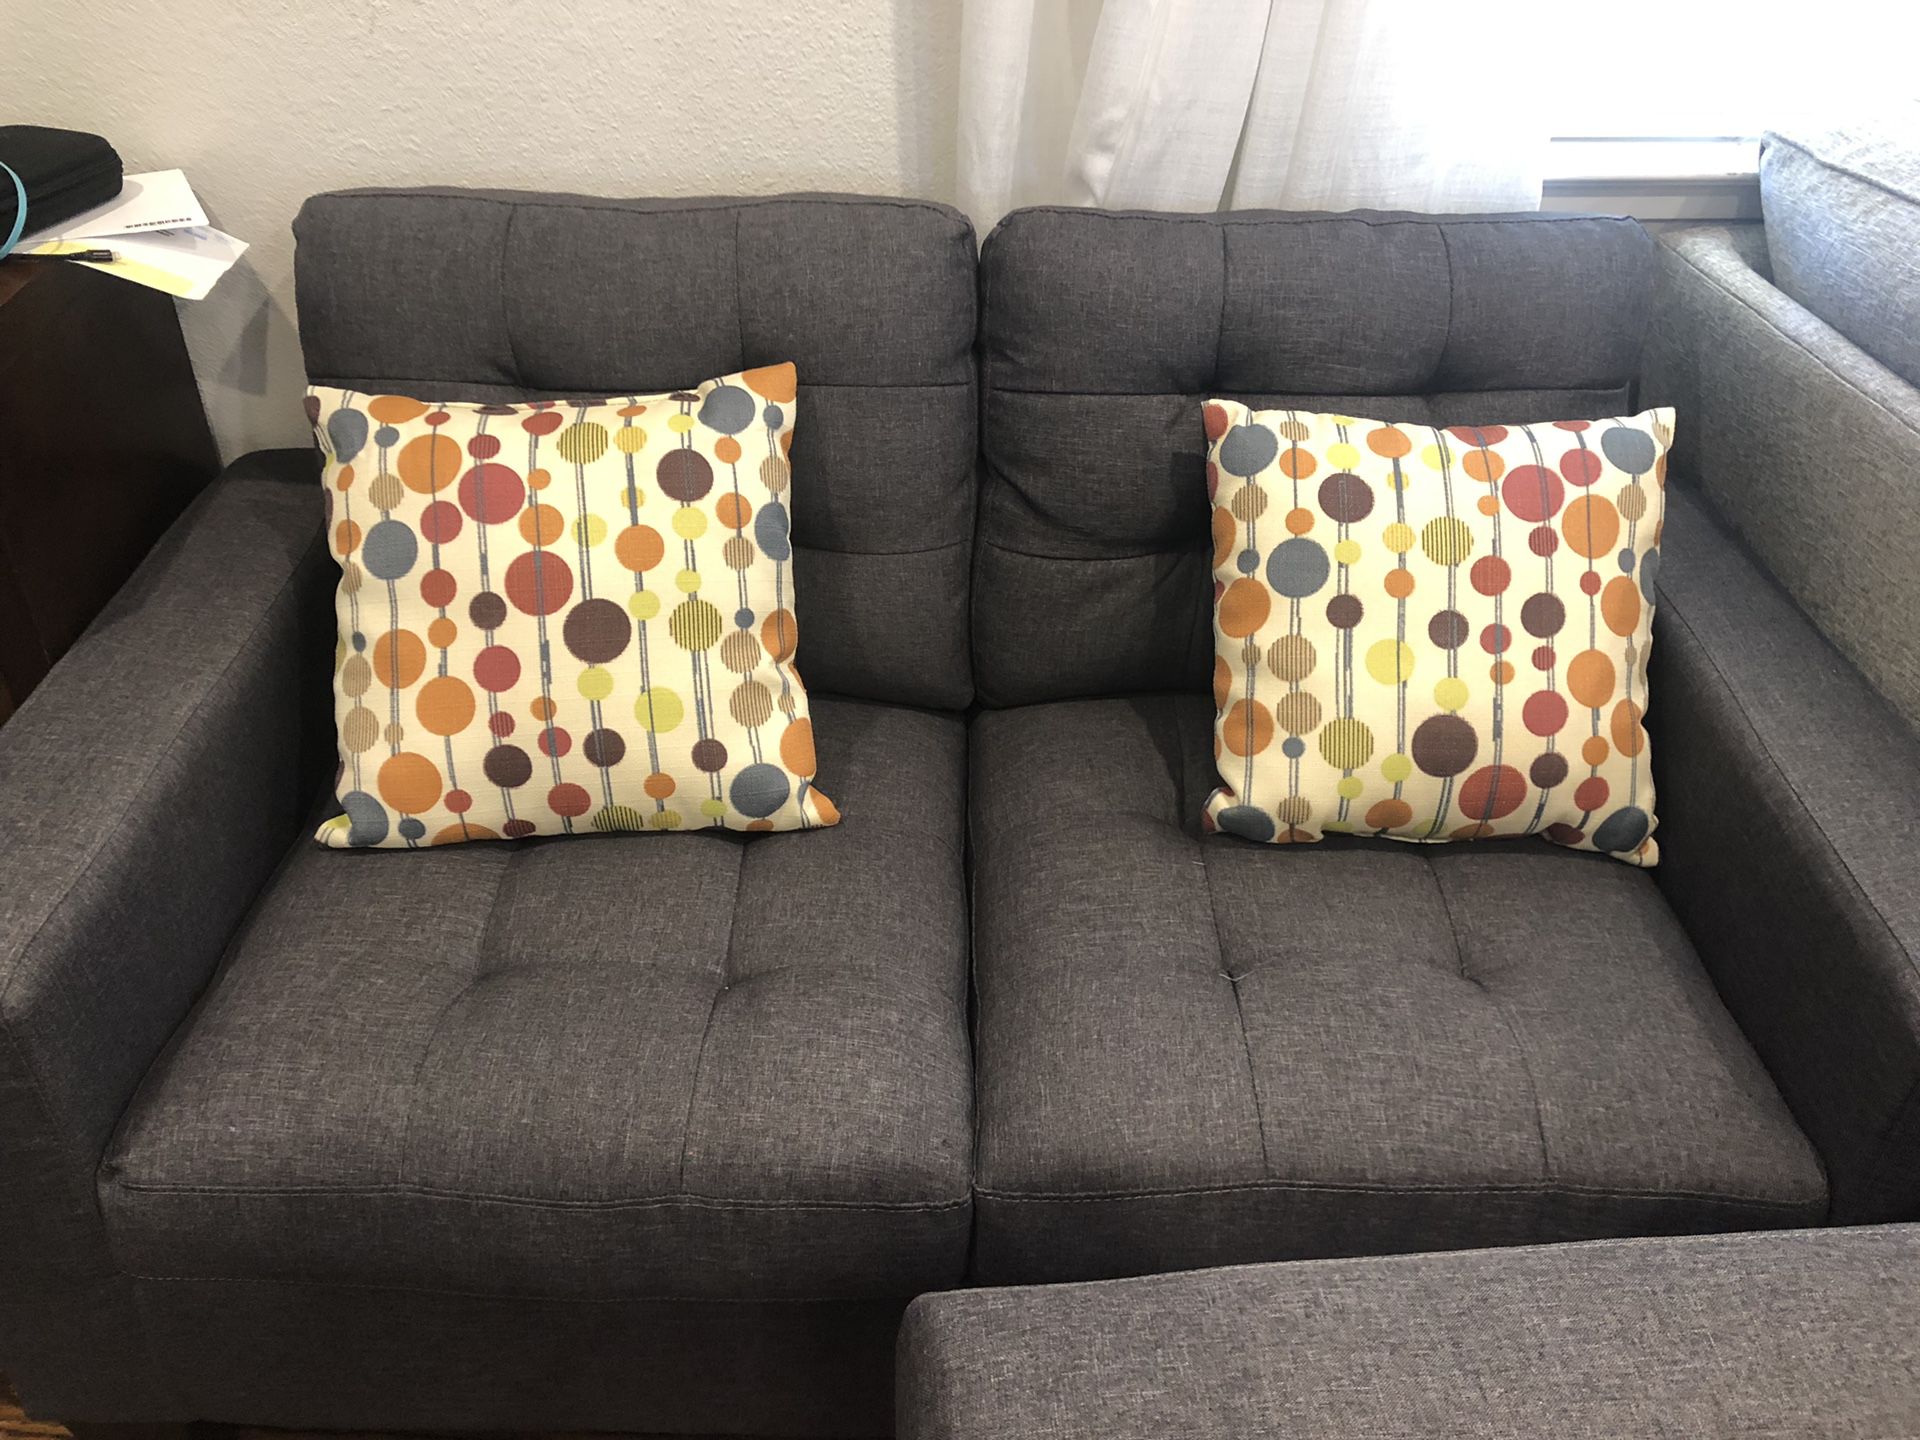 Gray couches like new $280 firm